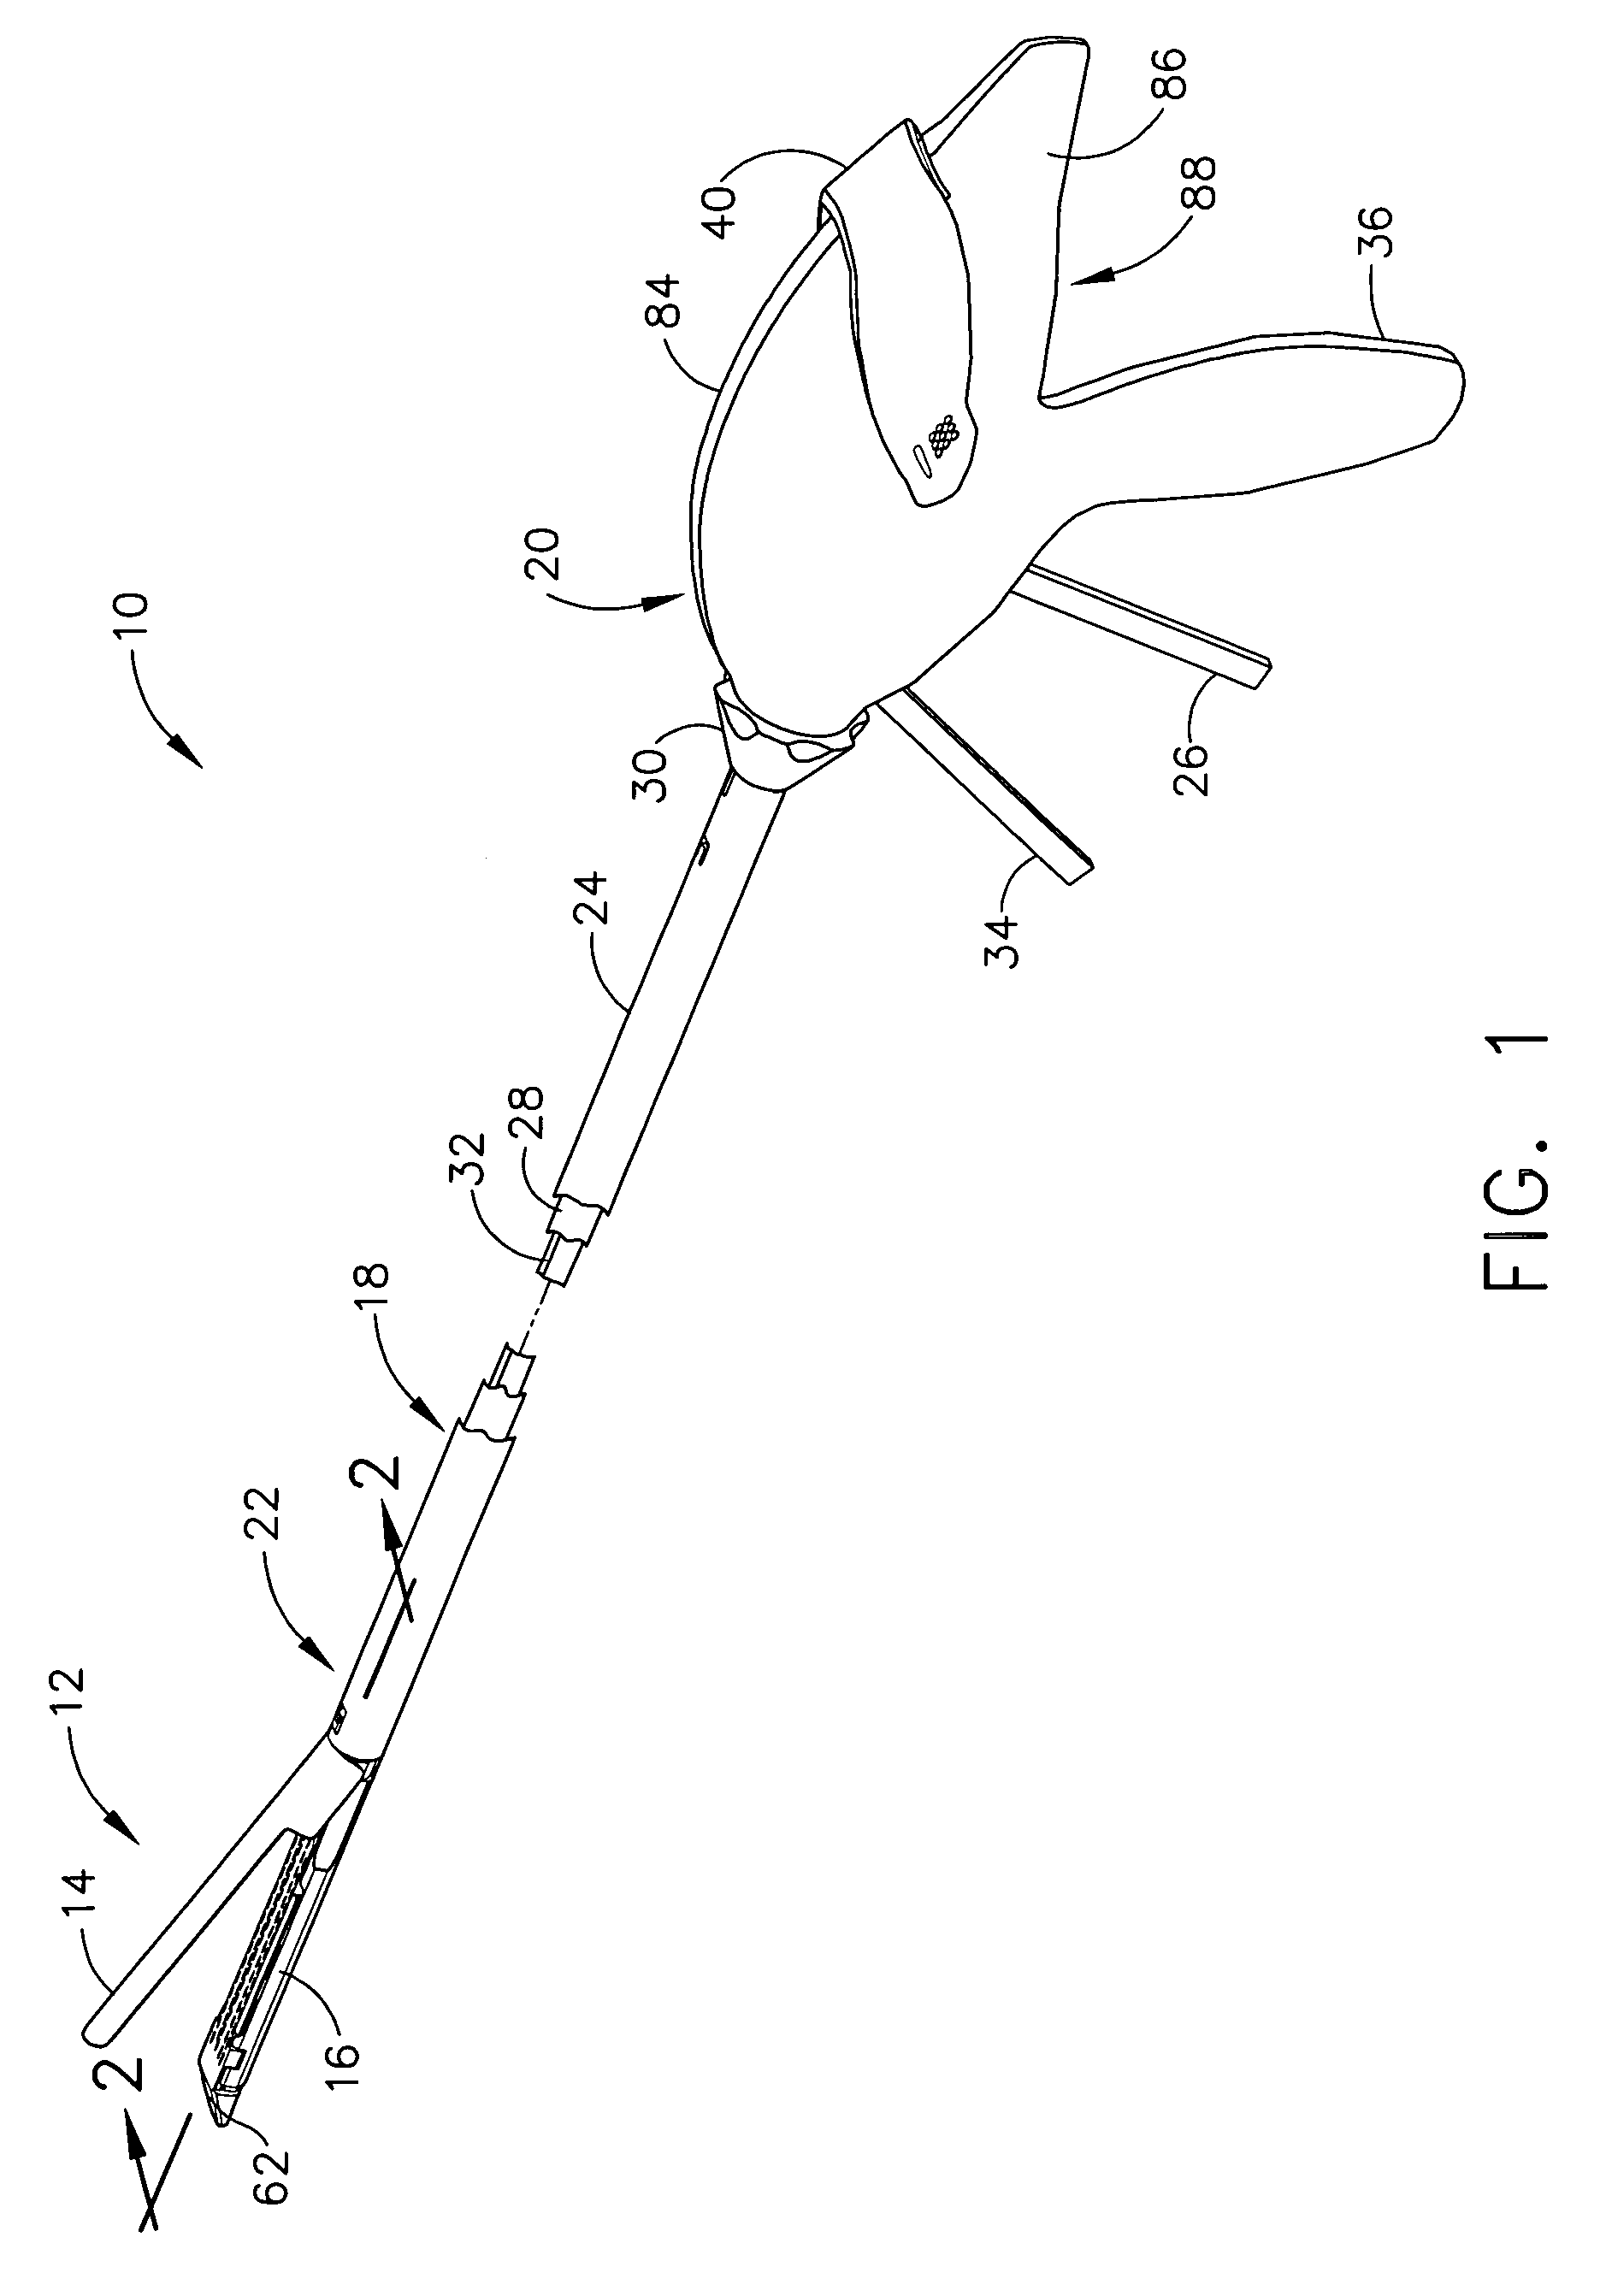 Surgical stapling instrument incorporating a multistroke firing mechanism having a rotary slip-clutch transmission